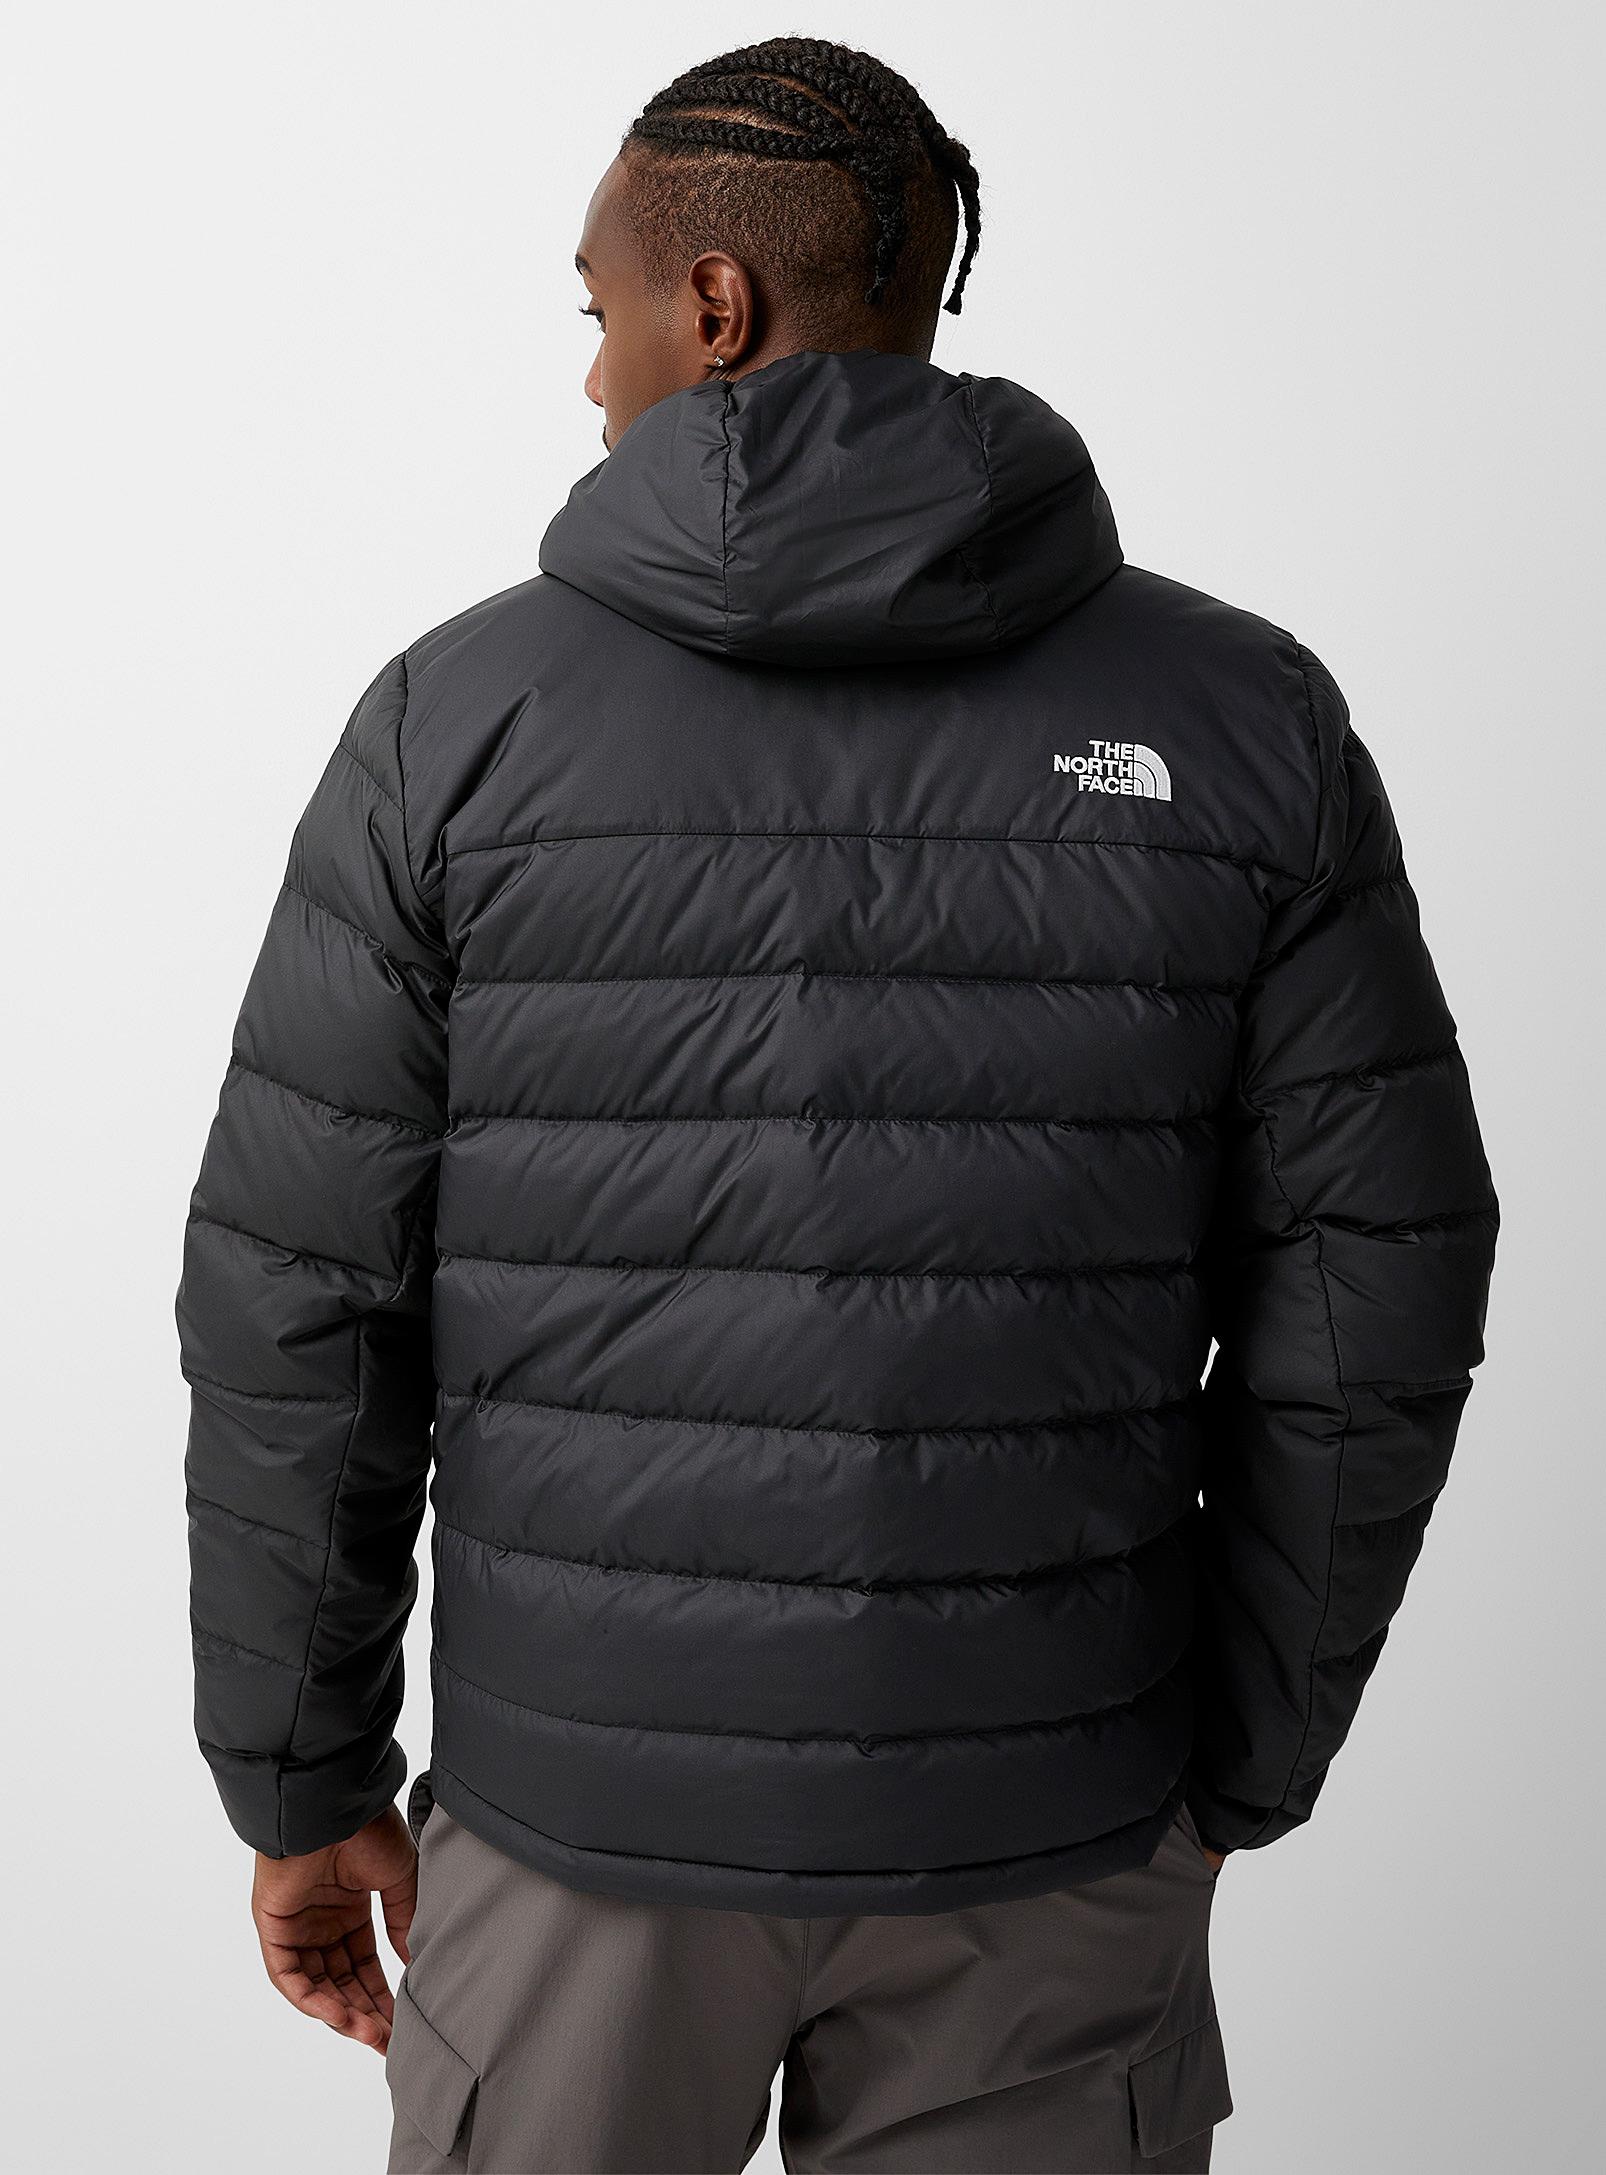 The North Face Men's Black Aconcagua 2 Hooded Puffer Jacket Relaxed Fit